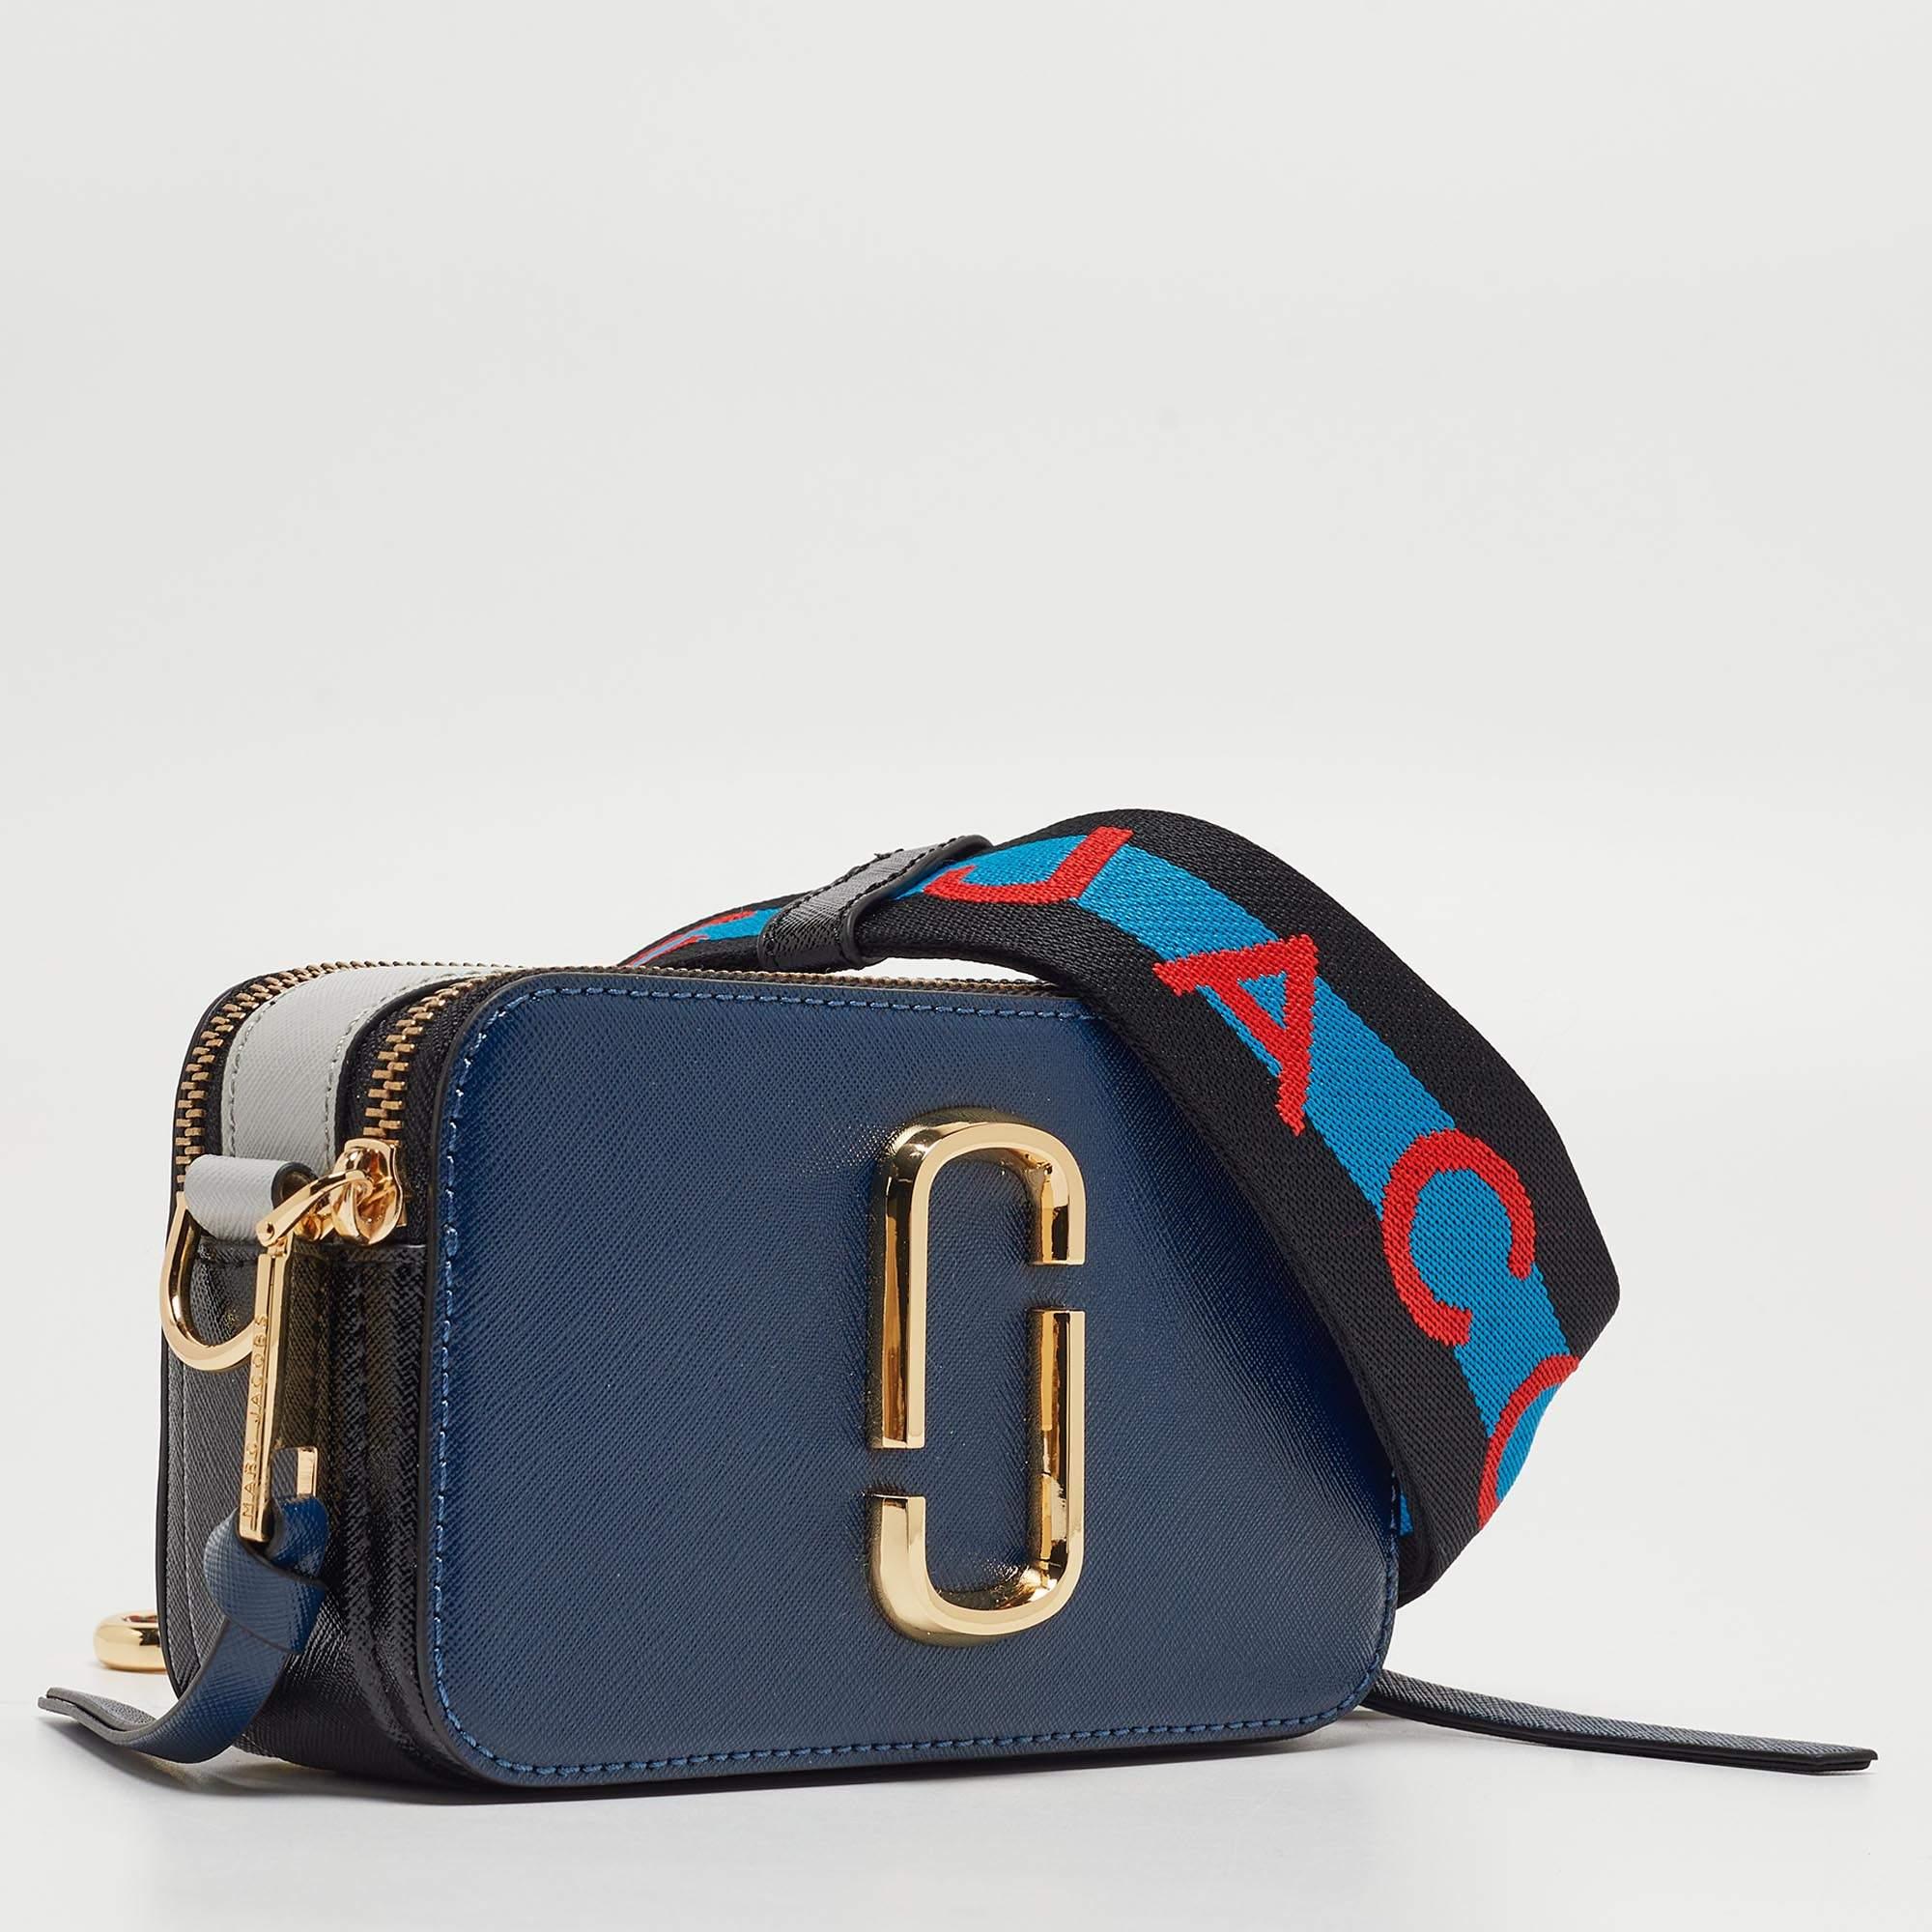 Crafted from quality materials, your wardrobe is missing out on this beautifully made Marc Jacobs Snapshot bag. Look your fashionable best in any outfit with this stylish bag that promises to elevate your ensemble.

